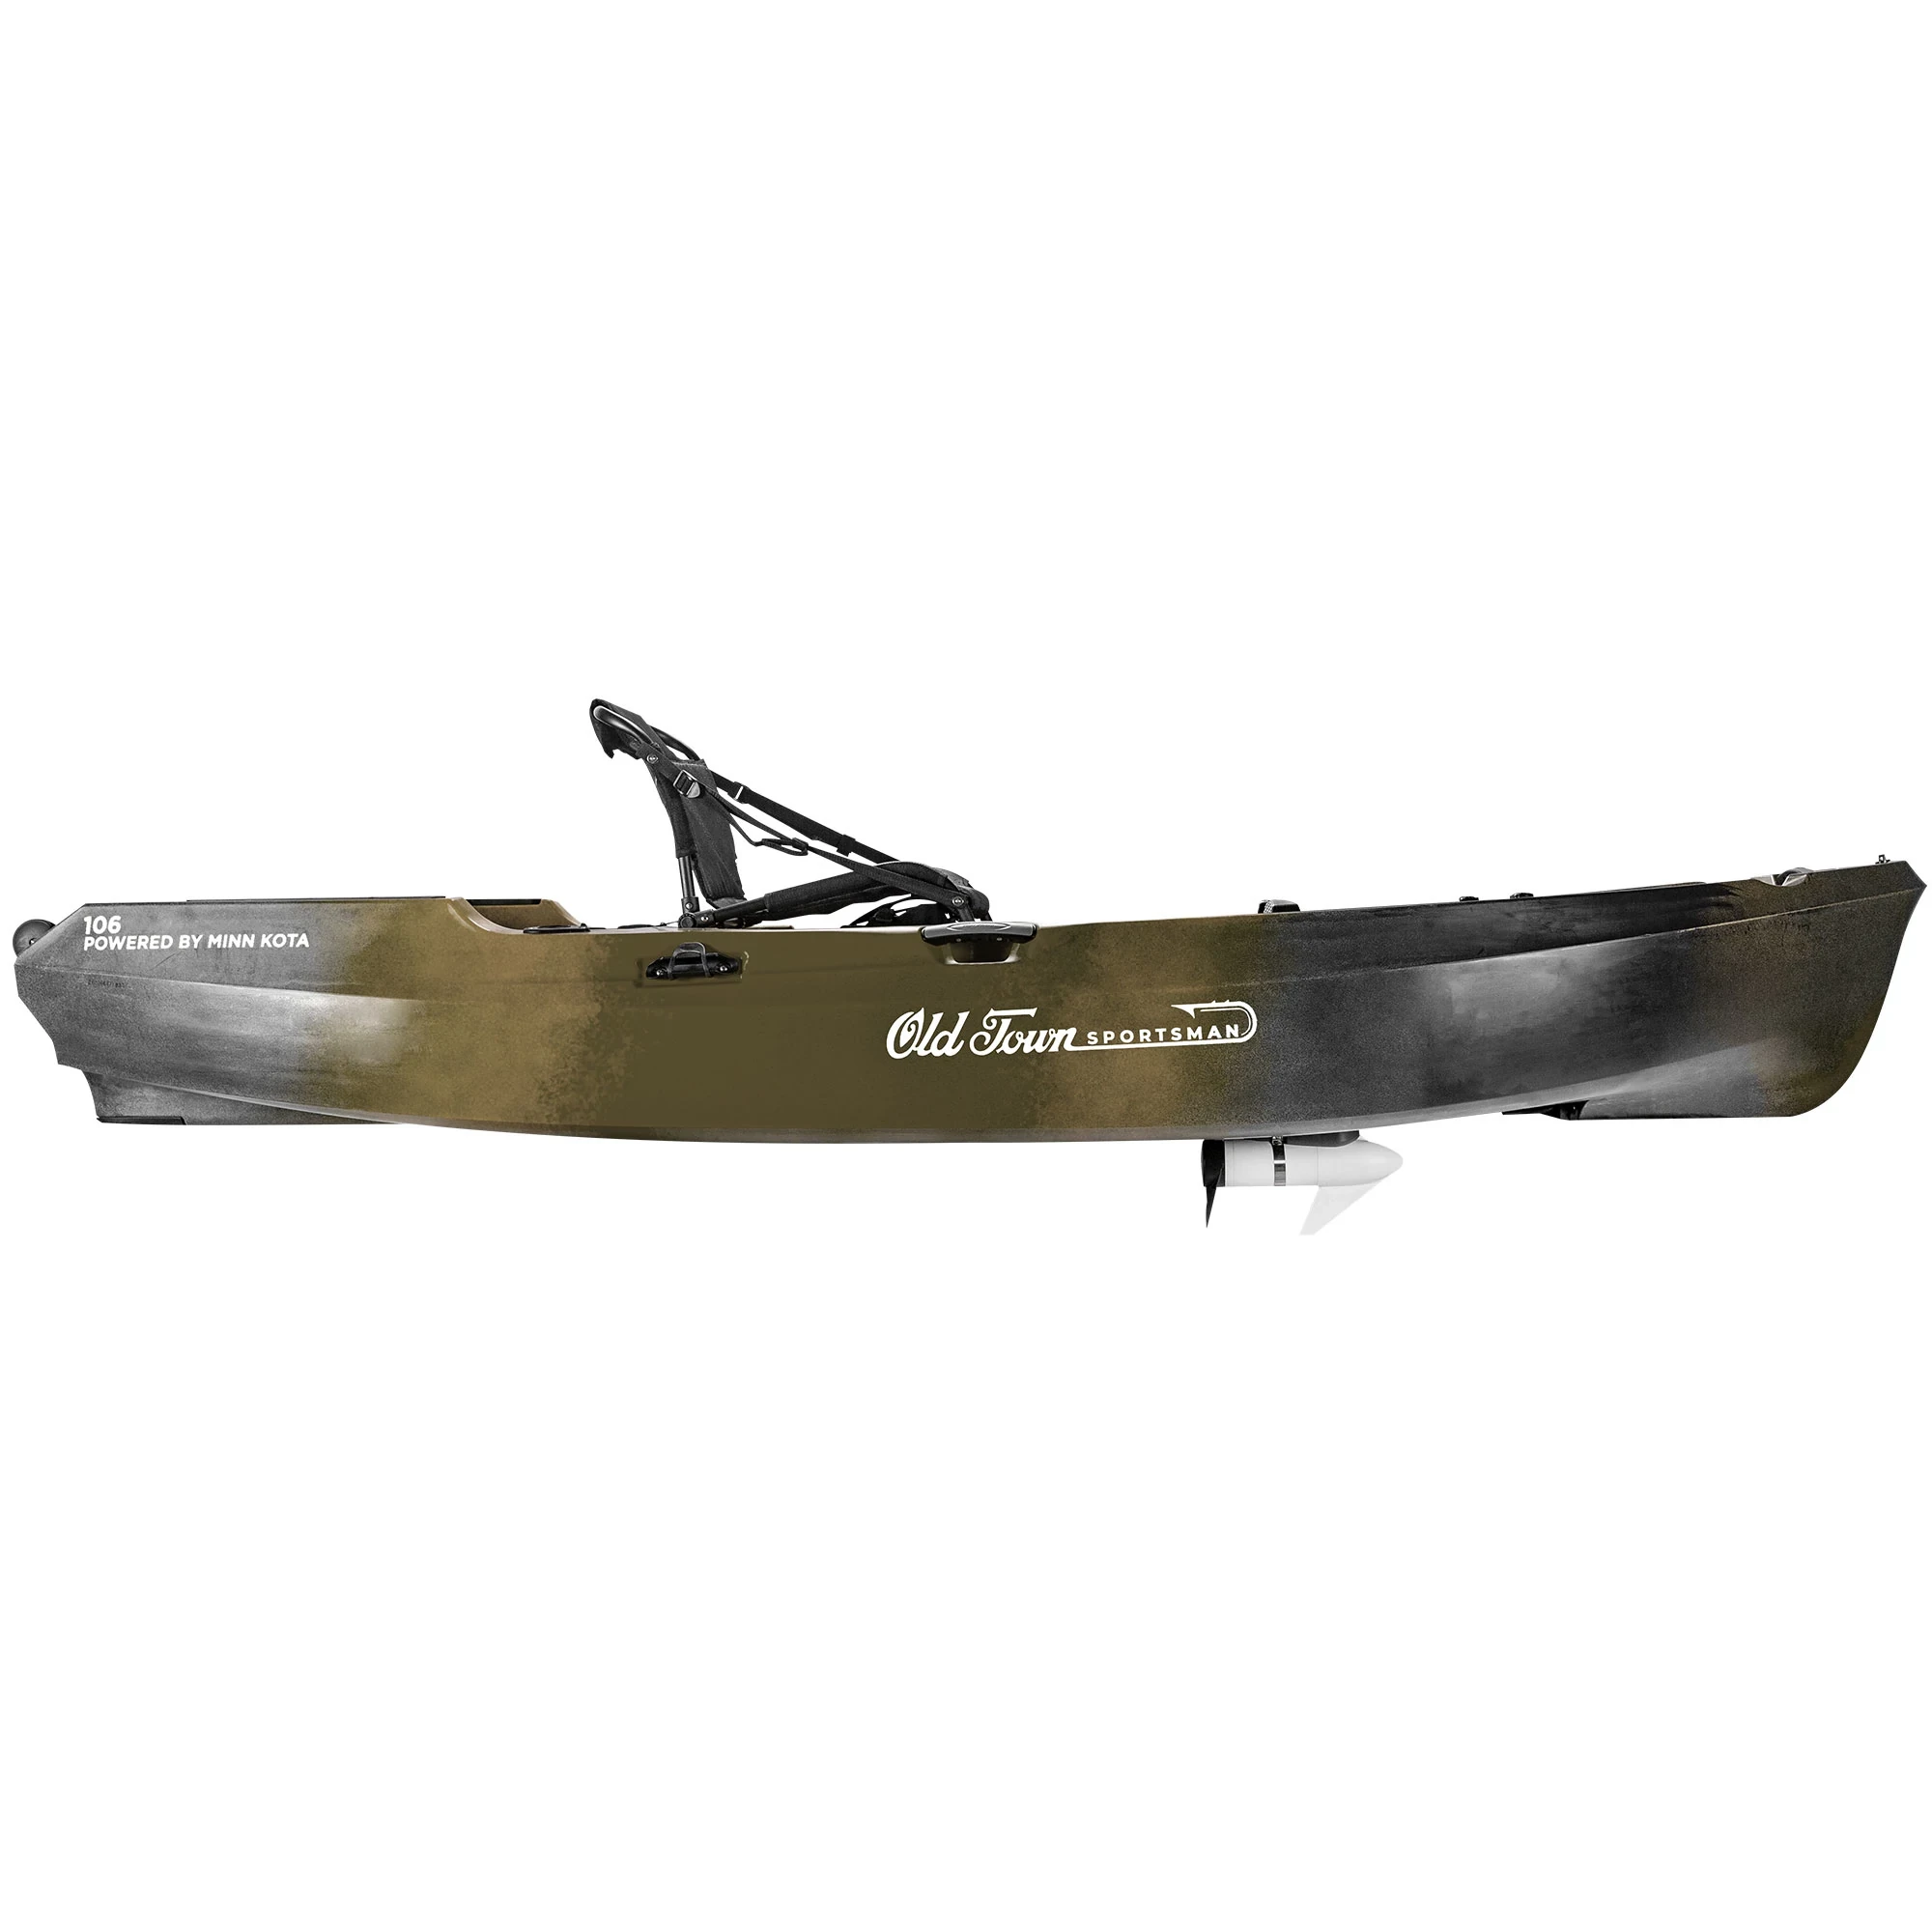 Old Town Sportsman 106 MK - Marsh Camo - Side view with prop down